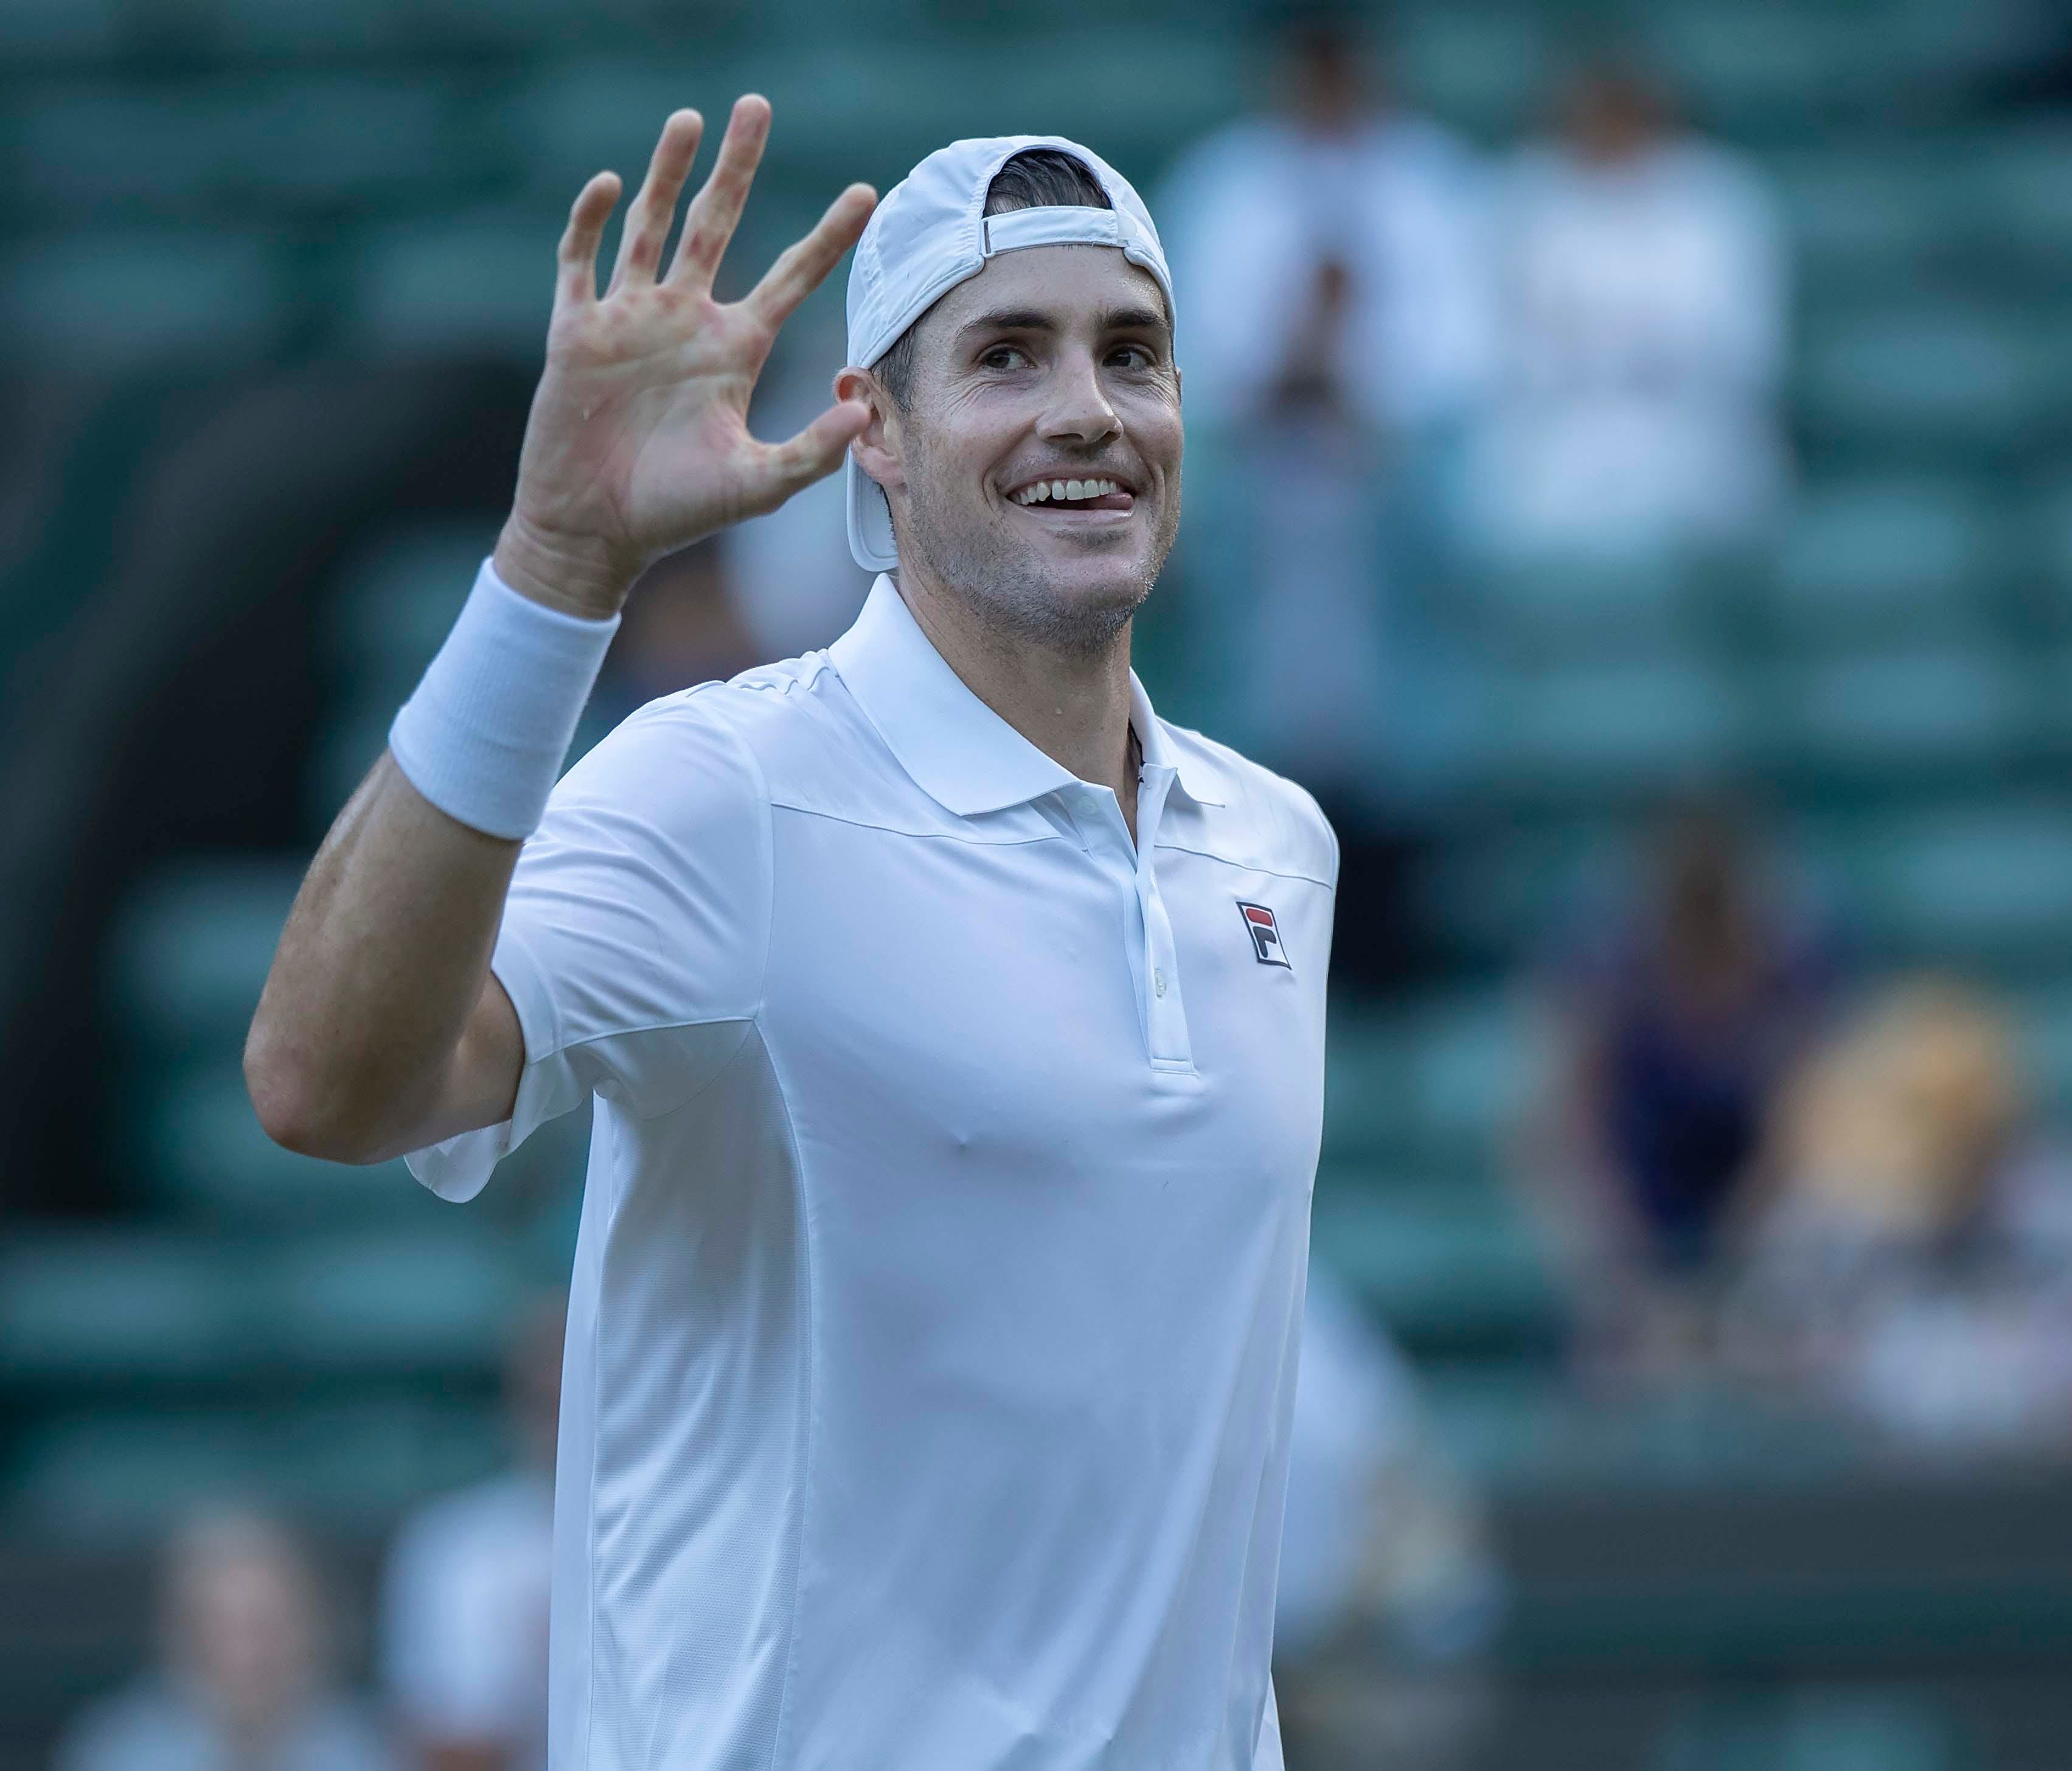 John Isner celebrates match point during his match against Milos Raonic on day nine of Wimbledon at All England Lawn and Croquet Club on July 11.